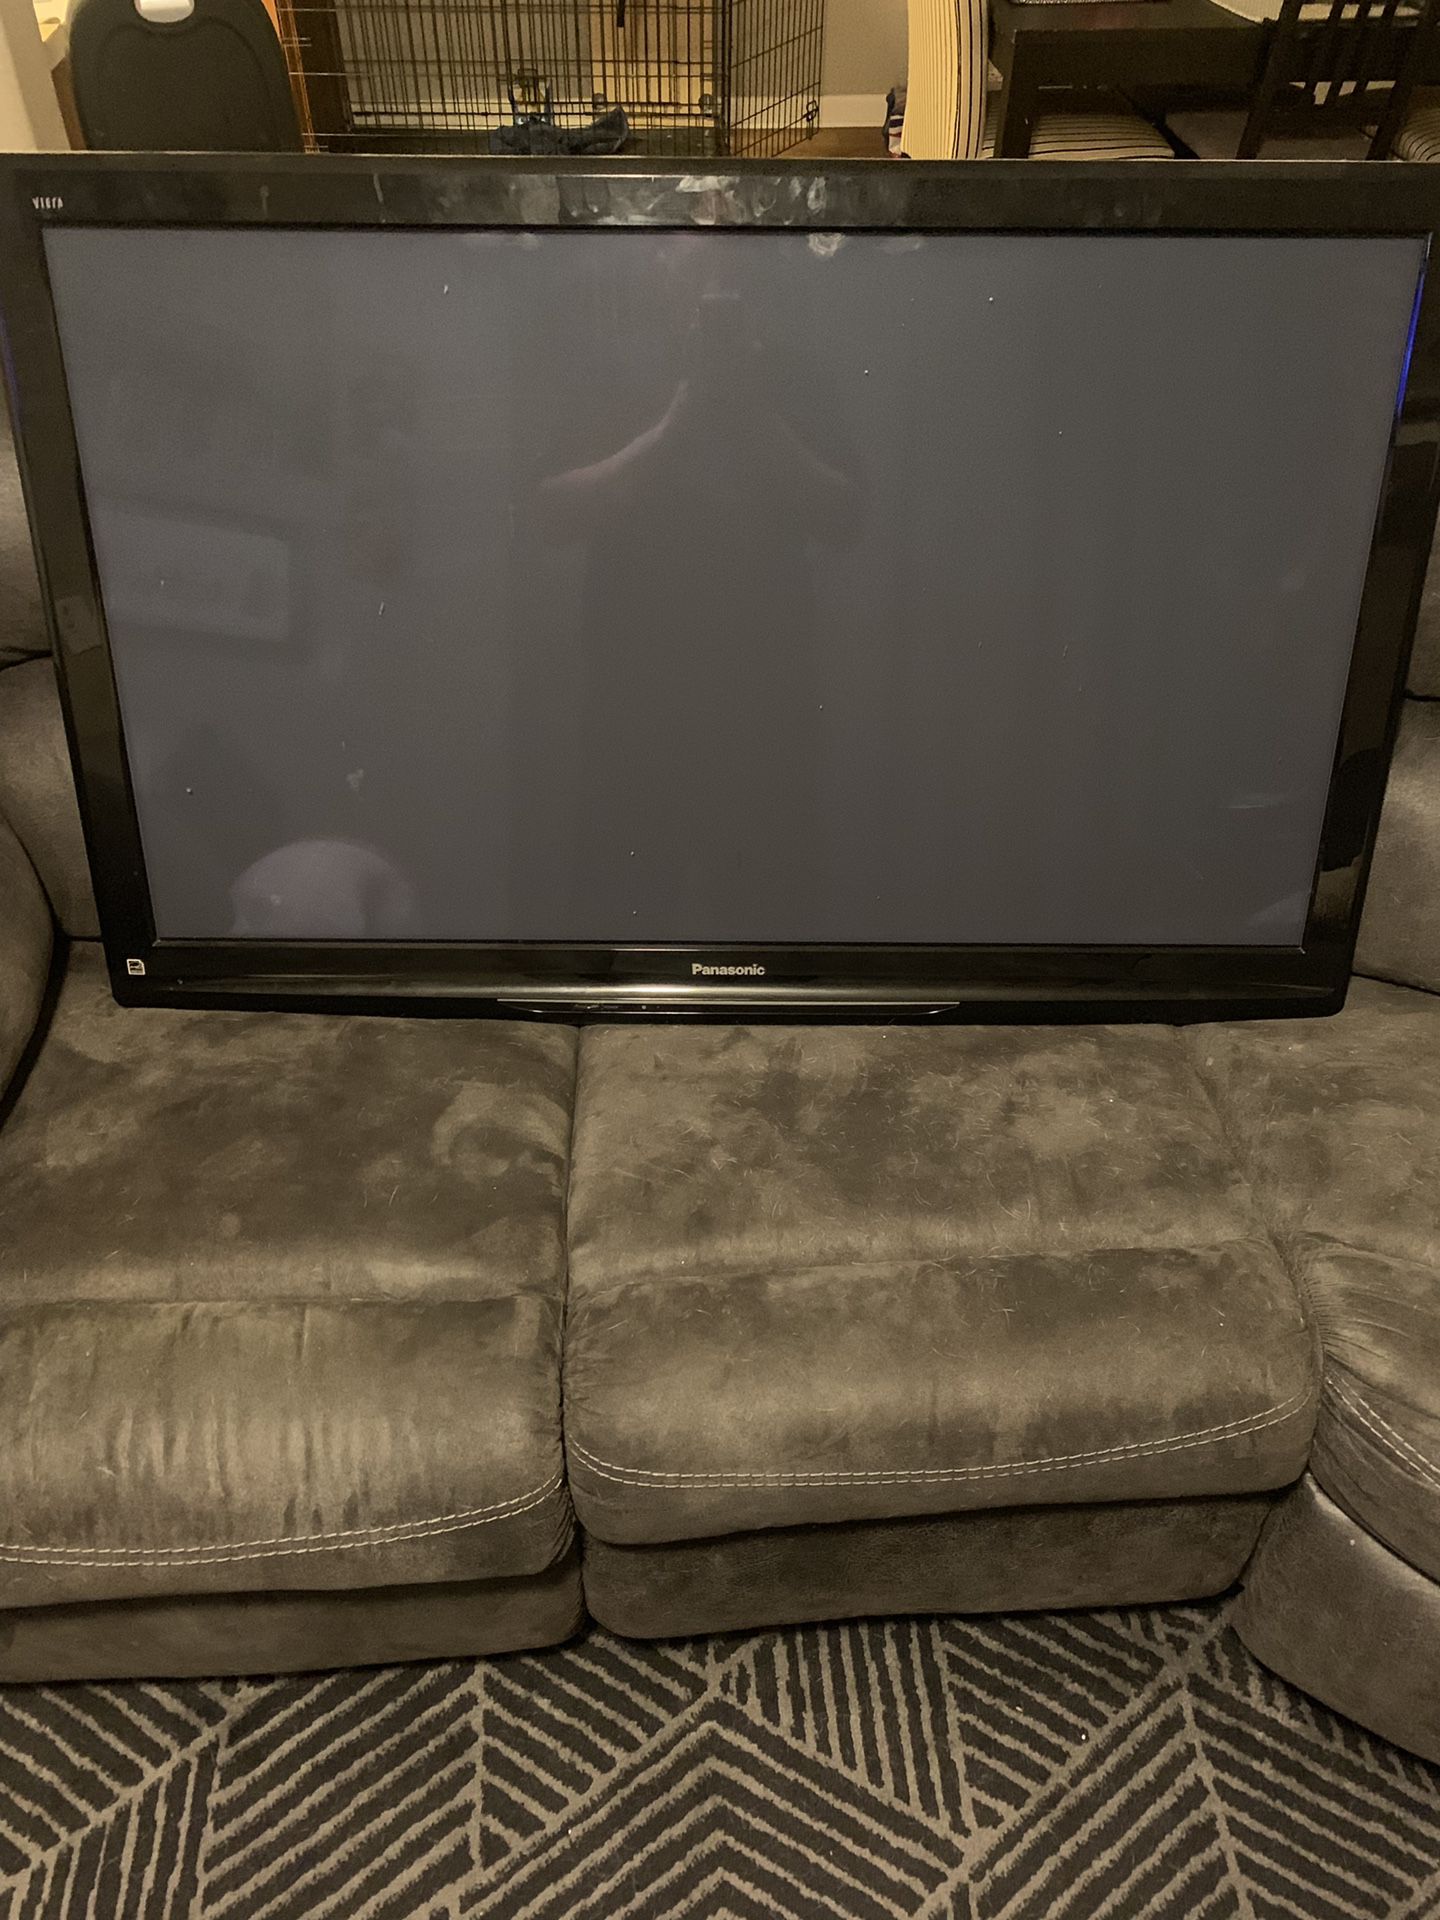 55 inch panasonic tv. Tv works but hdmi plug ins not working